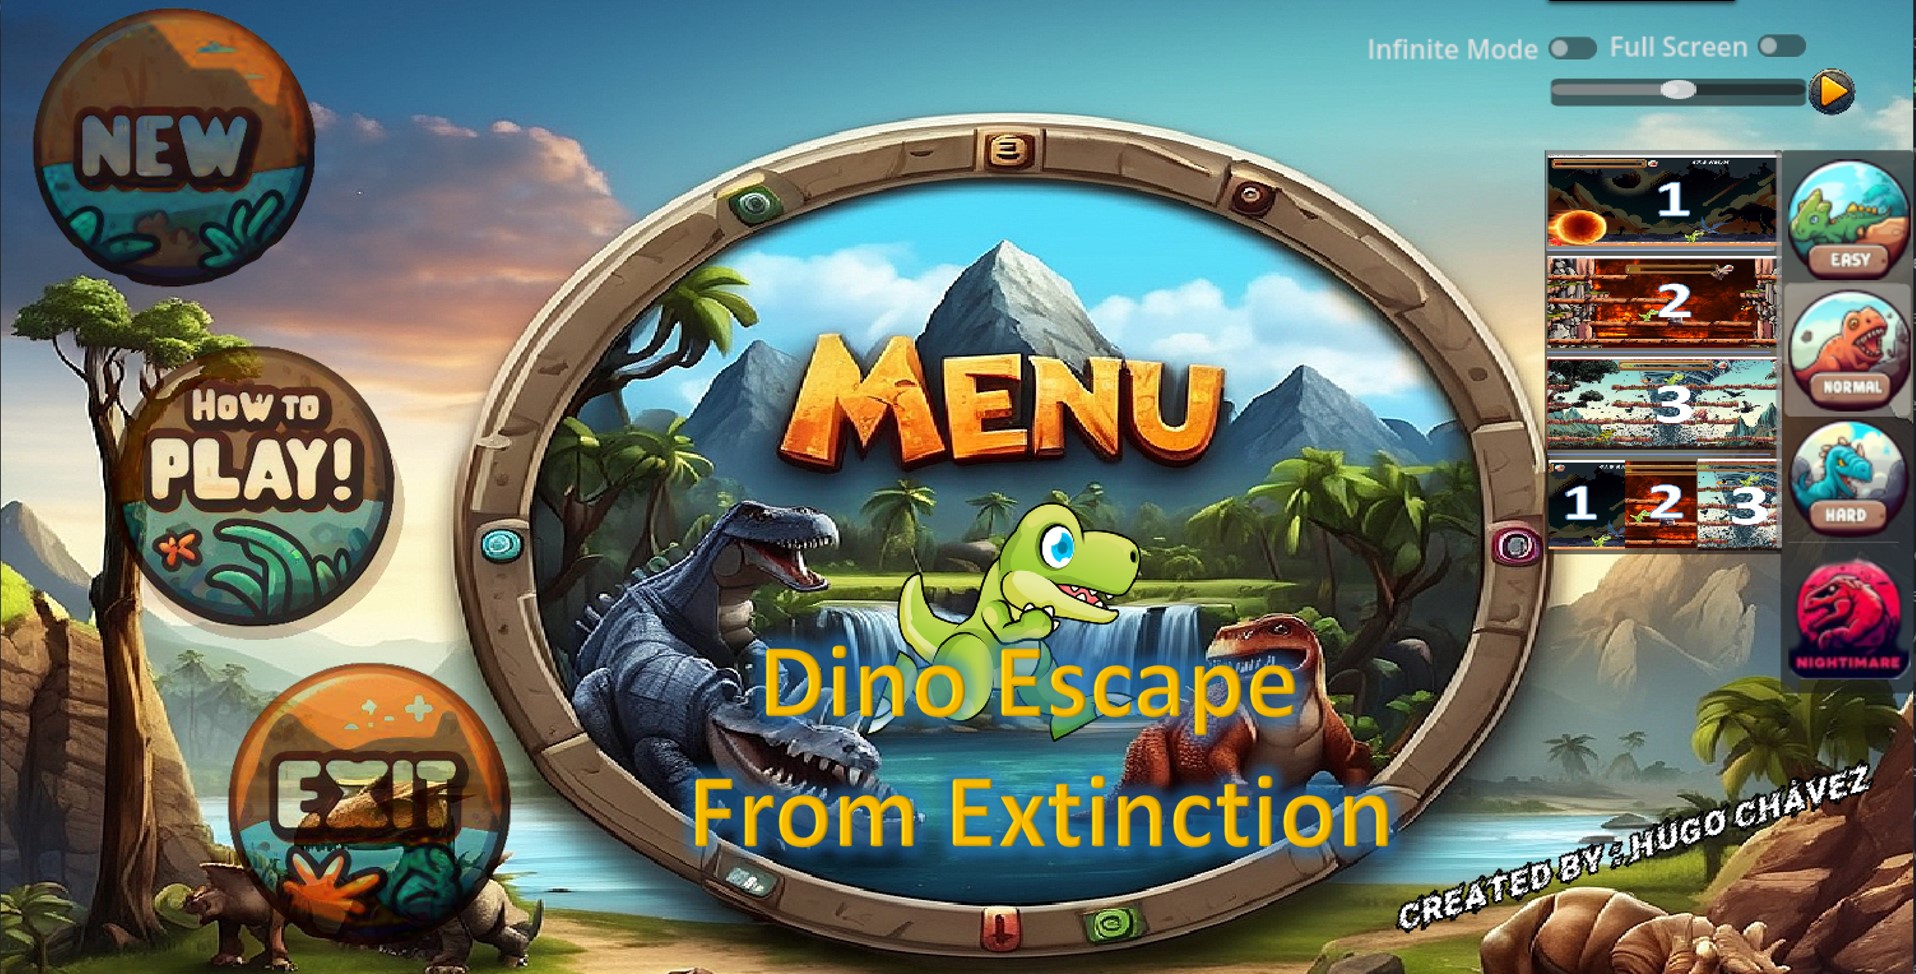 Dino Escape From Extinction